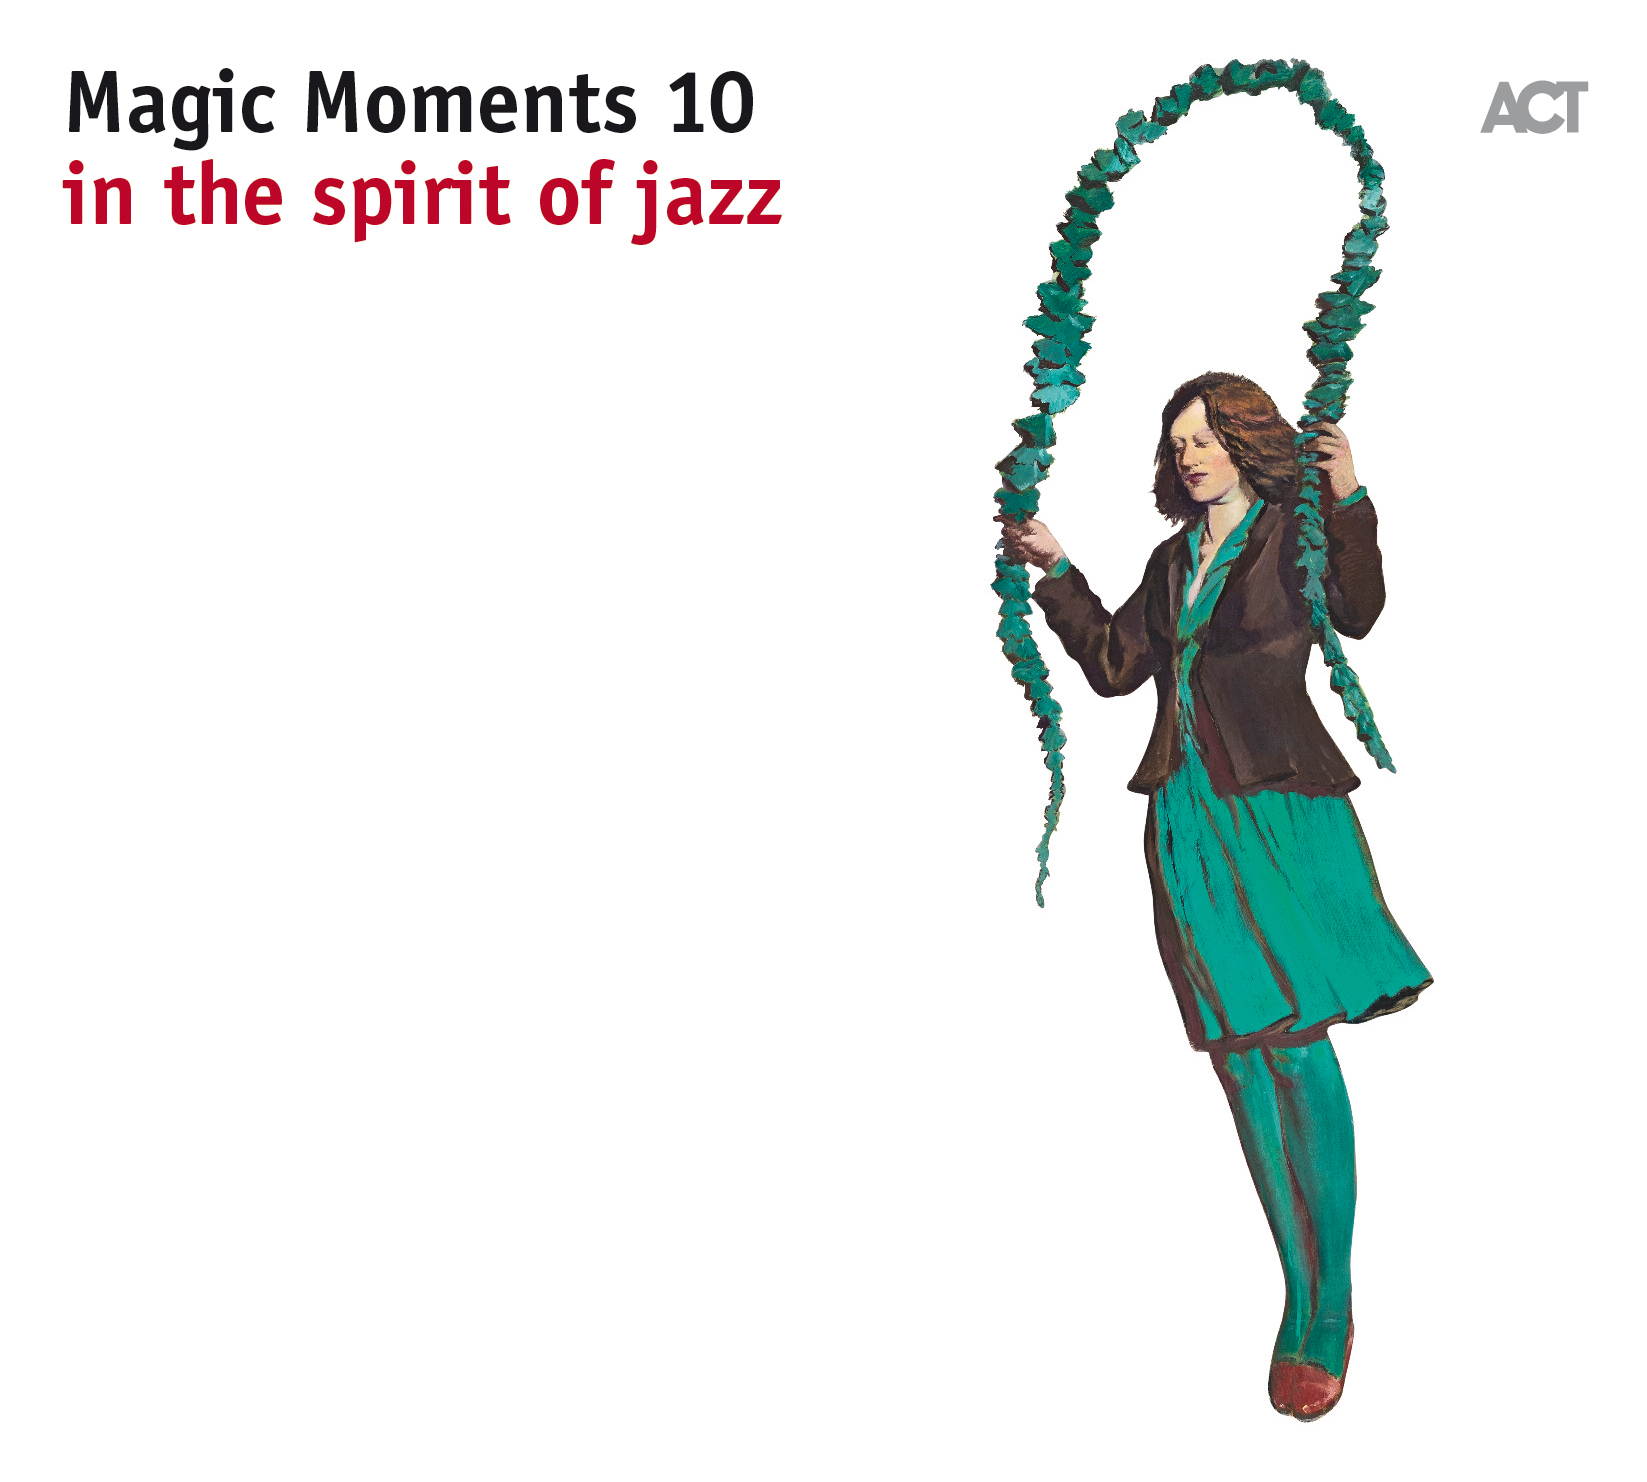 Magic Moments 10 "In The Spirit of Jazz"